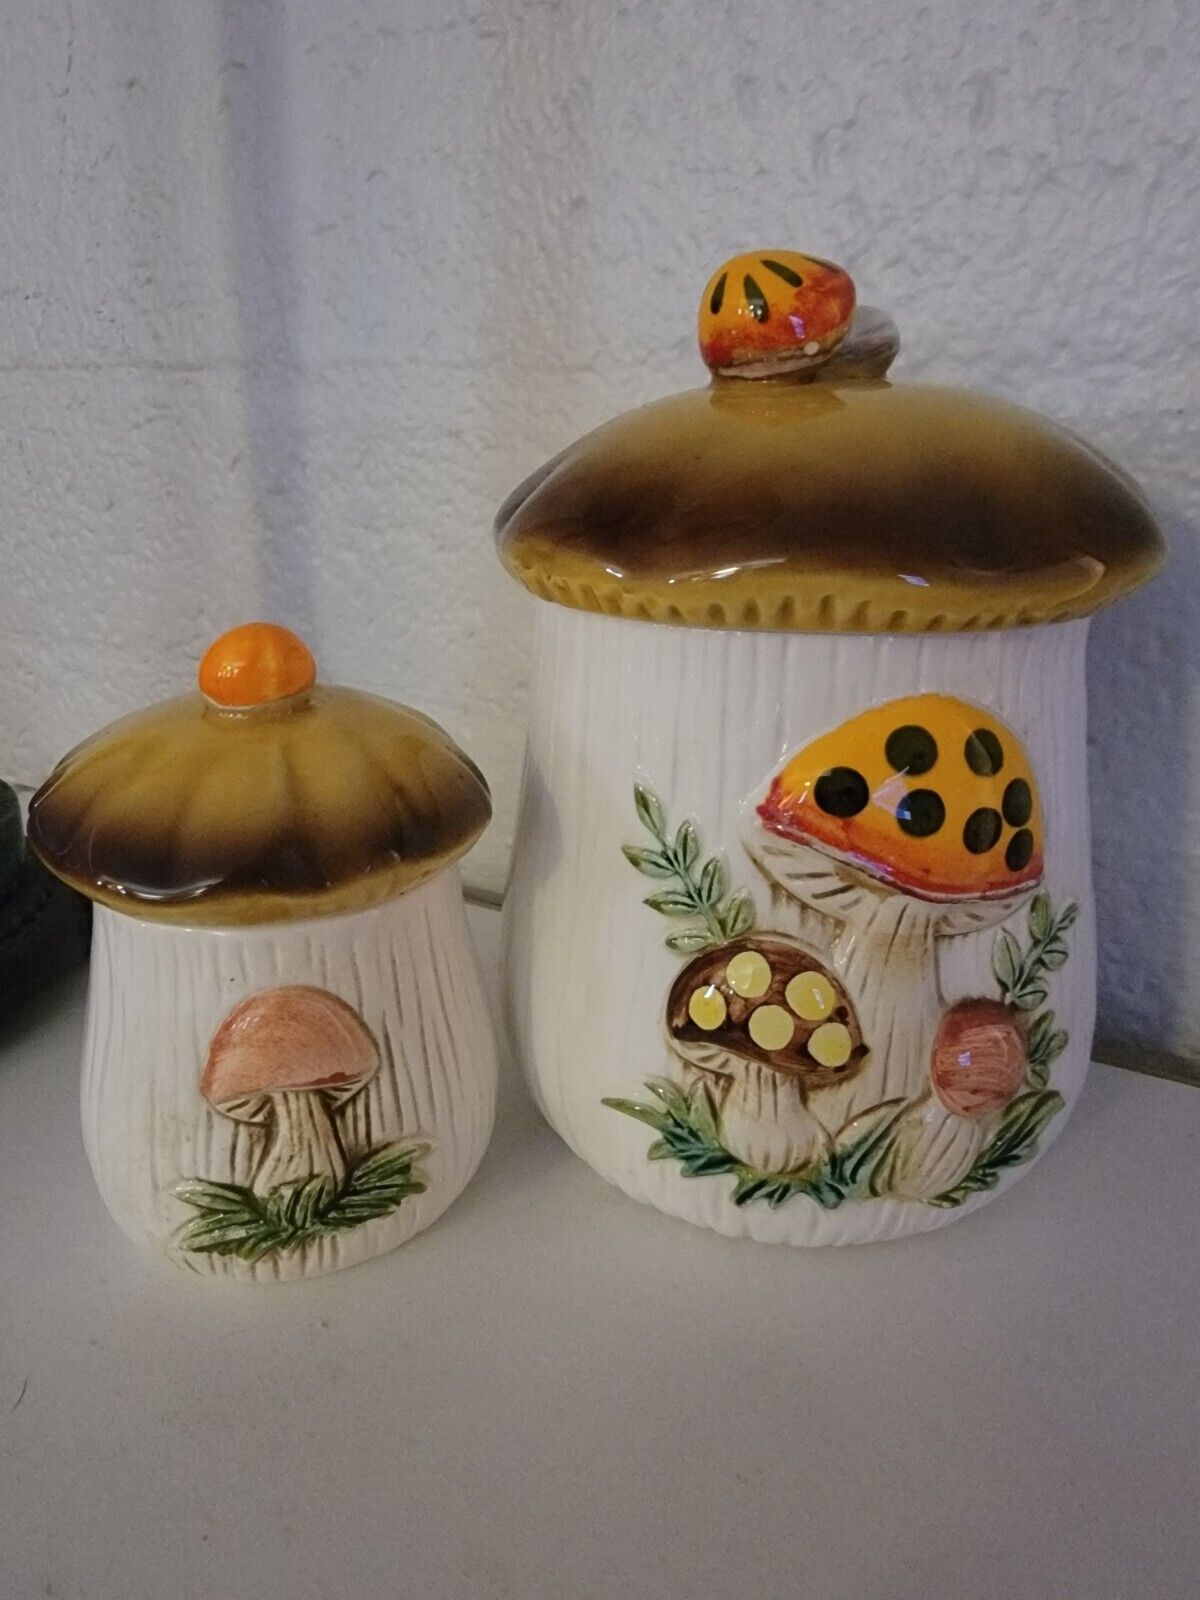 1983 Sears Roebuck & Co. Mushroom Canisters, 2 Smallest Pieces. 7\